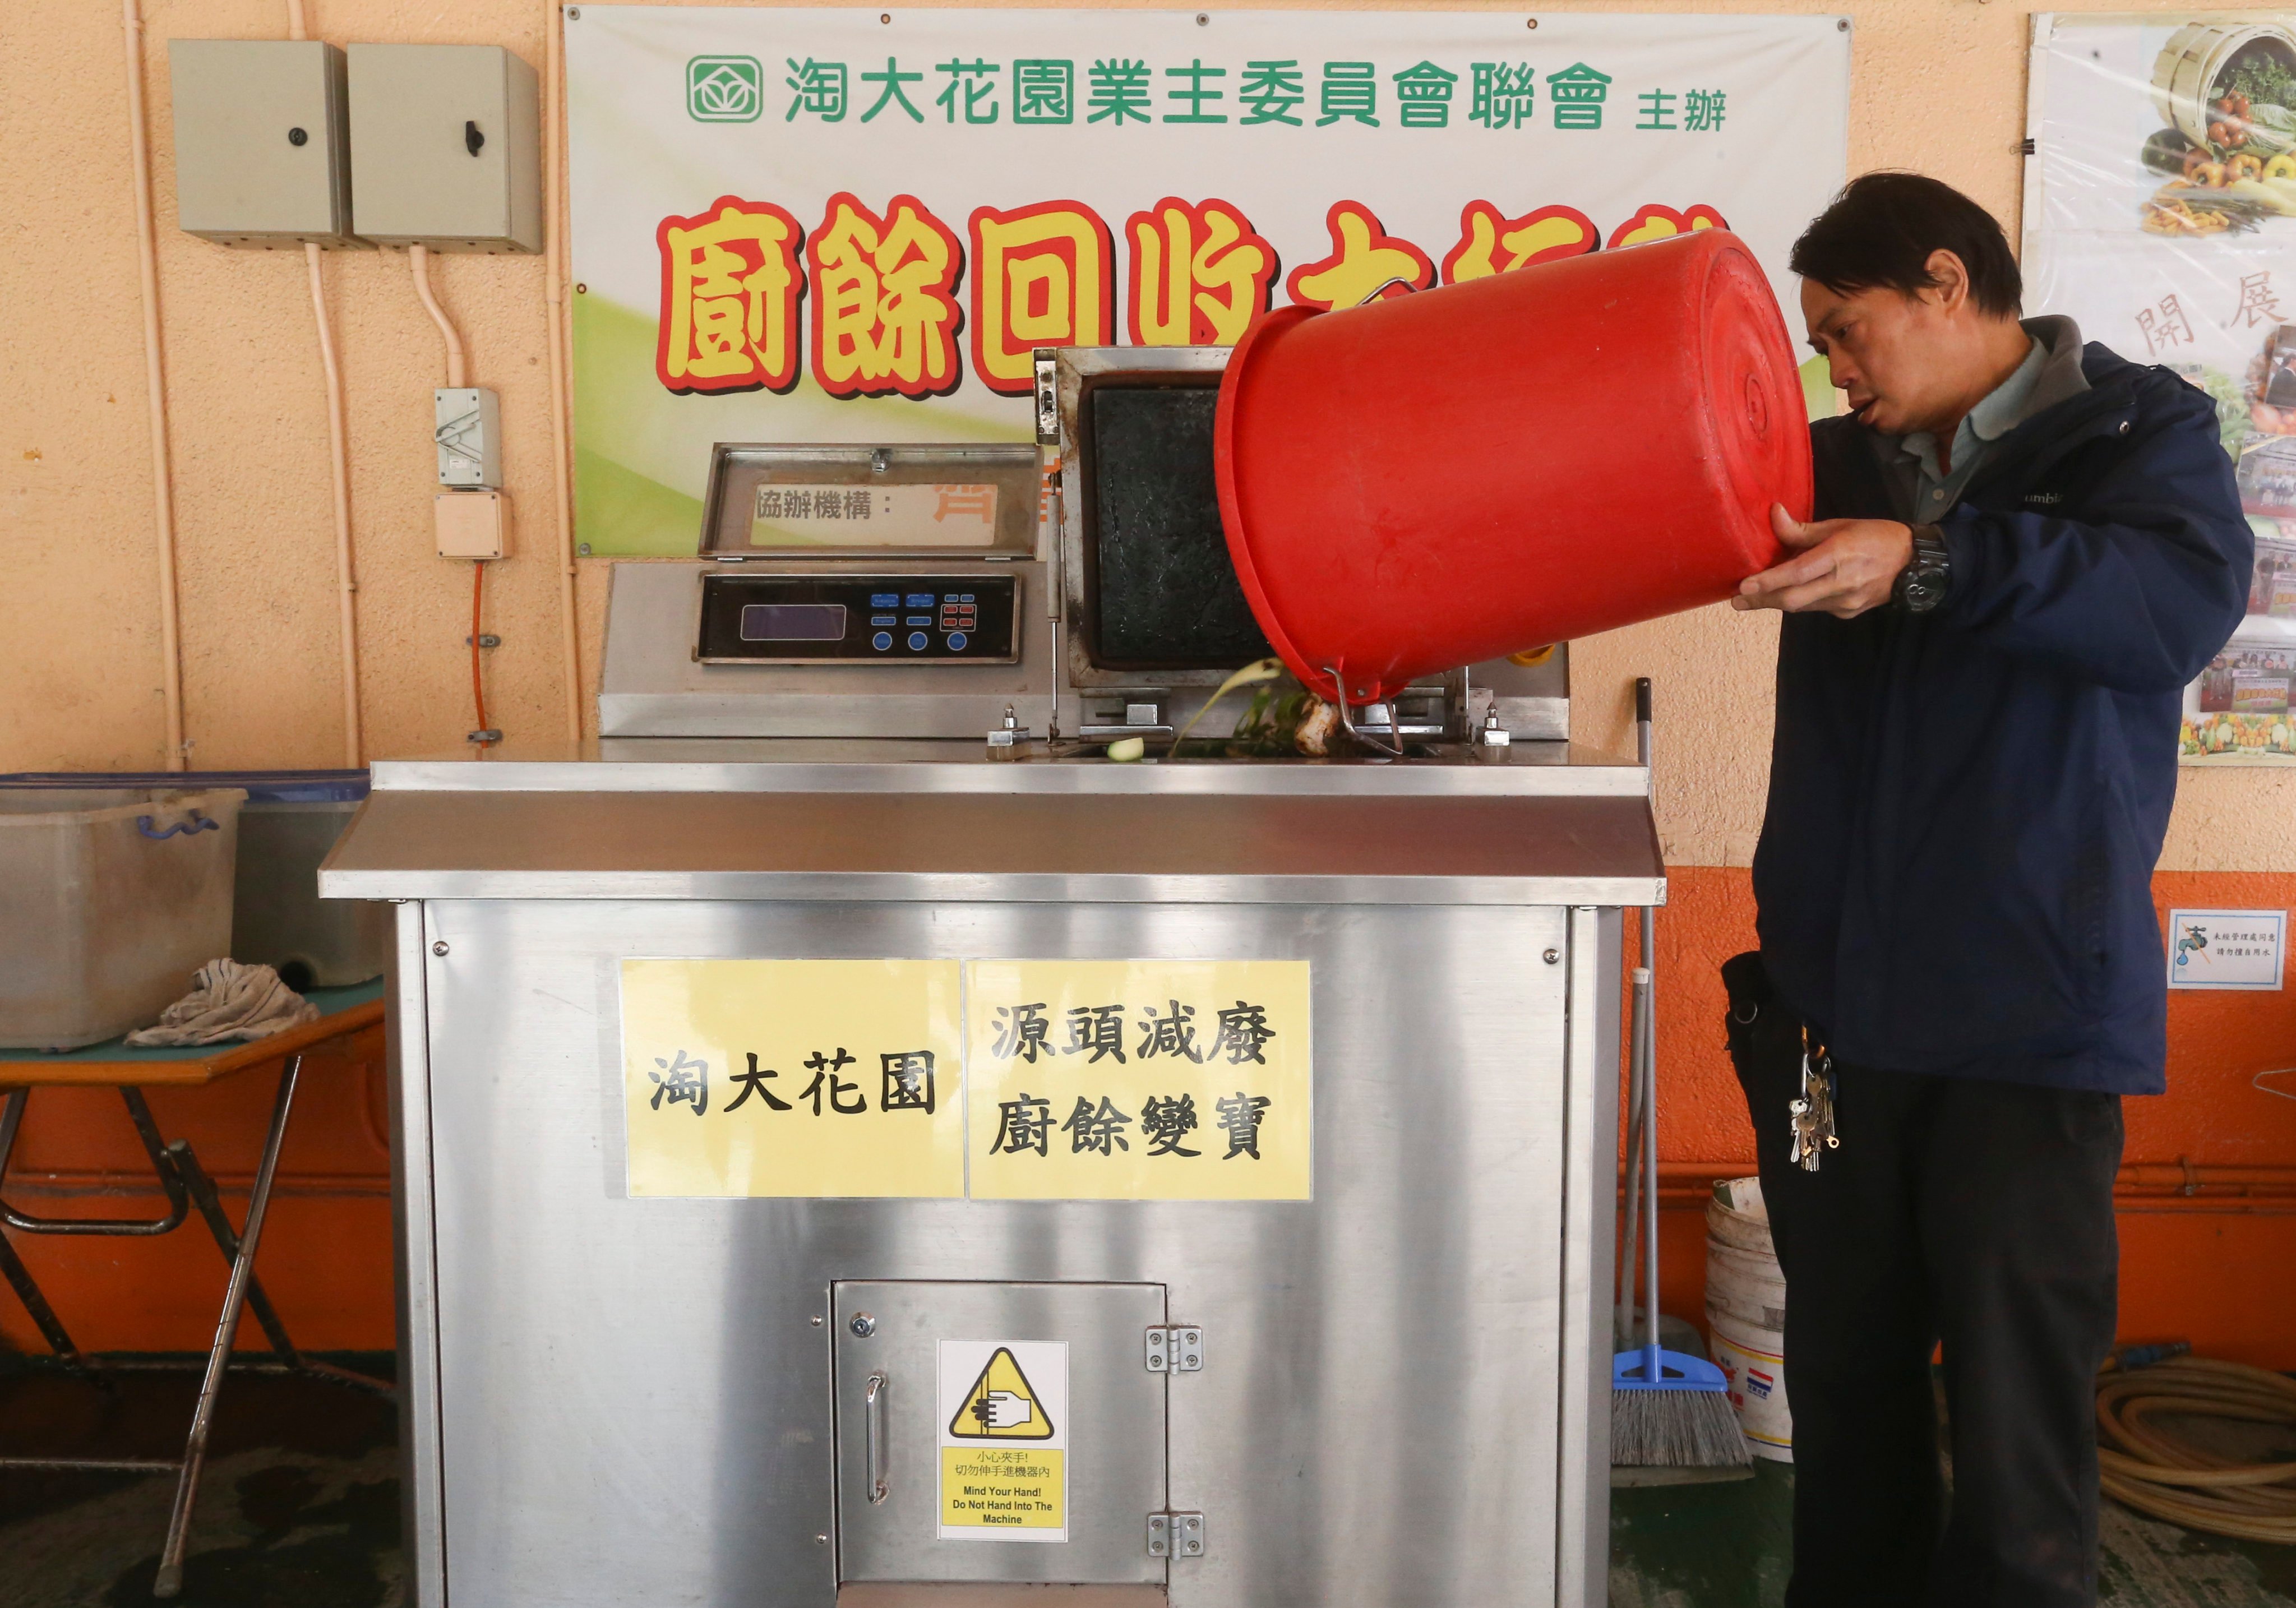 A worker uses a food waste composter at a housing estate in Kowloon in Hong Kong in 2017. Recent discussions of waste management in Hong Kong have largely overlooked the benefits of composting. Photo: K.Y. Cheng